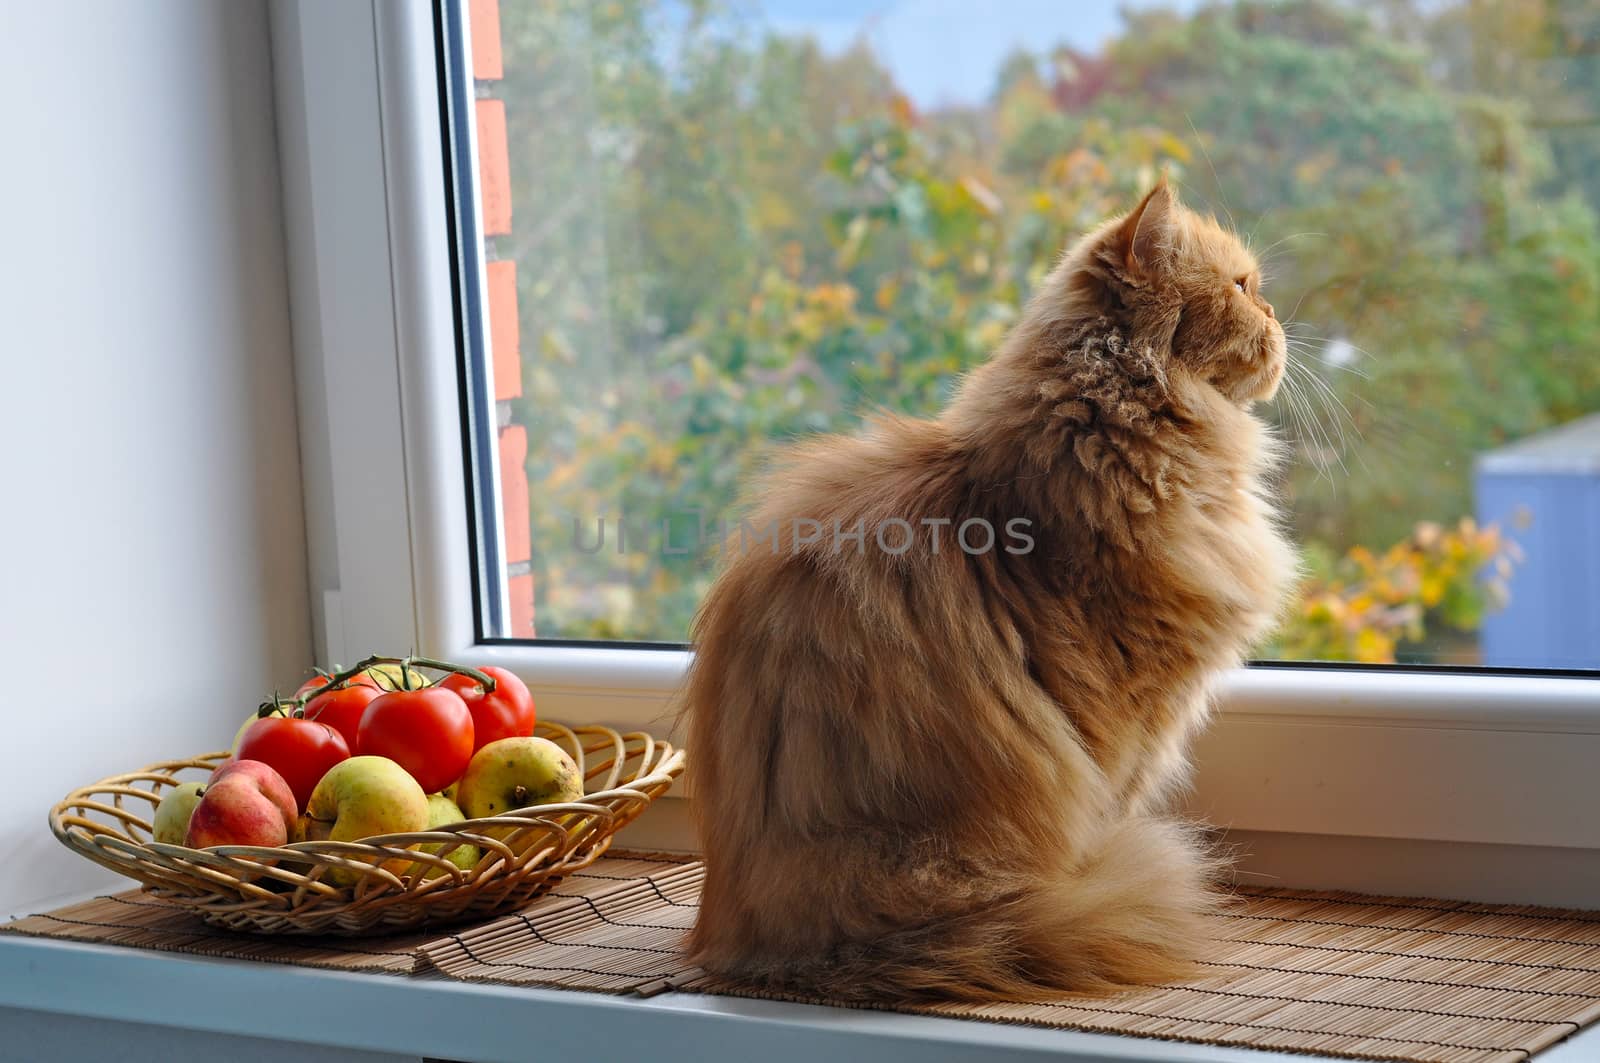 Red cat sitting on windowsill near apples and tomatoes and looking out the window at the autumn landscape. Big red Persian cat.